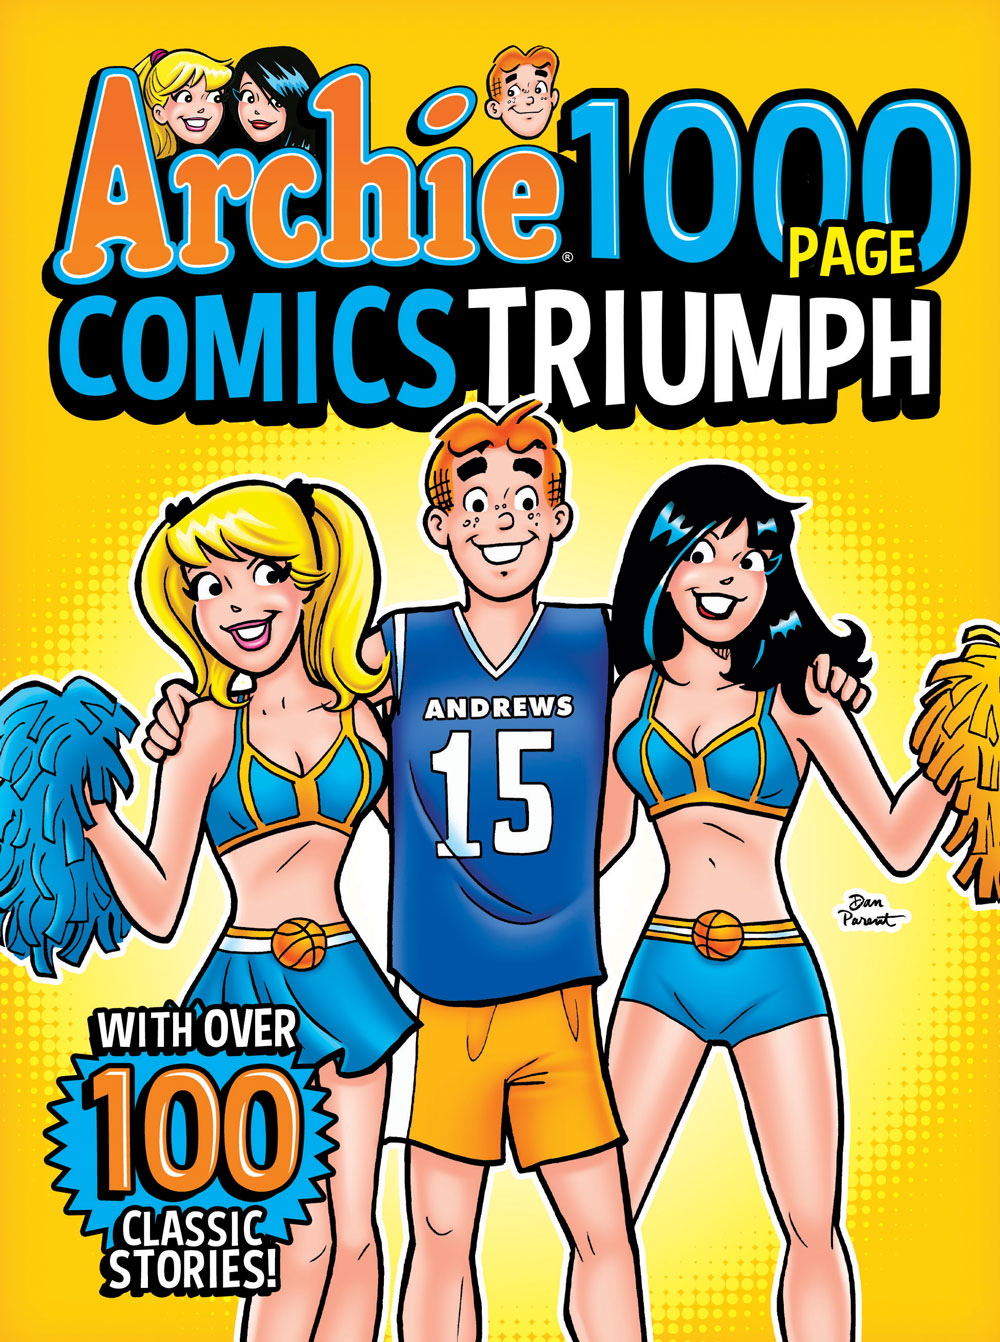 Cover of ARCHIE 1000 PAGE COMICS TRIUMPH. Betty and Veronica, in cheerleading uniforms, stand next to Archie, in a football uniform.